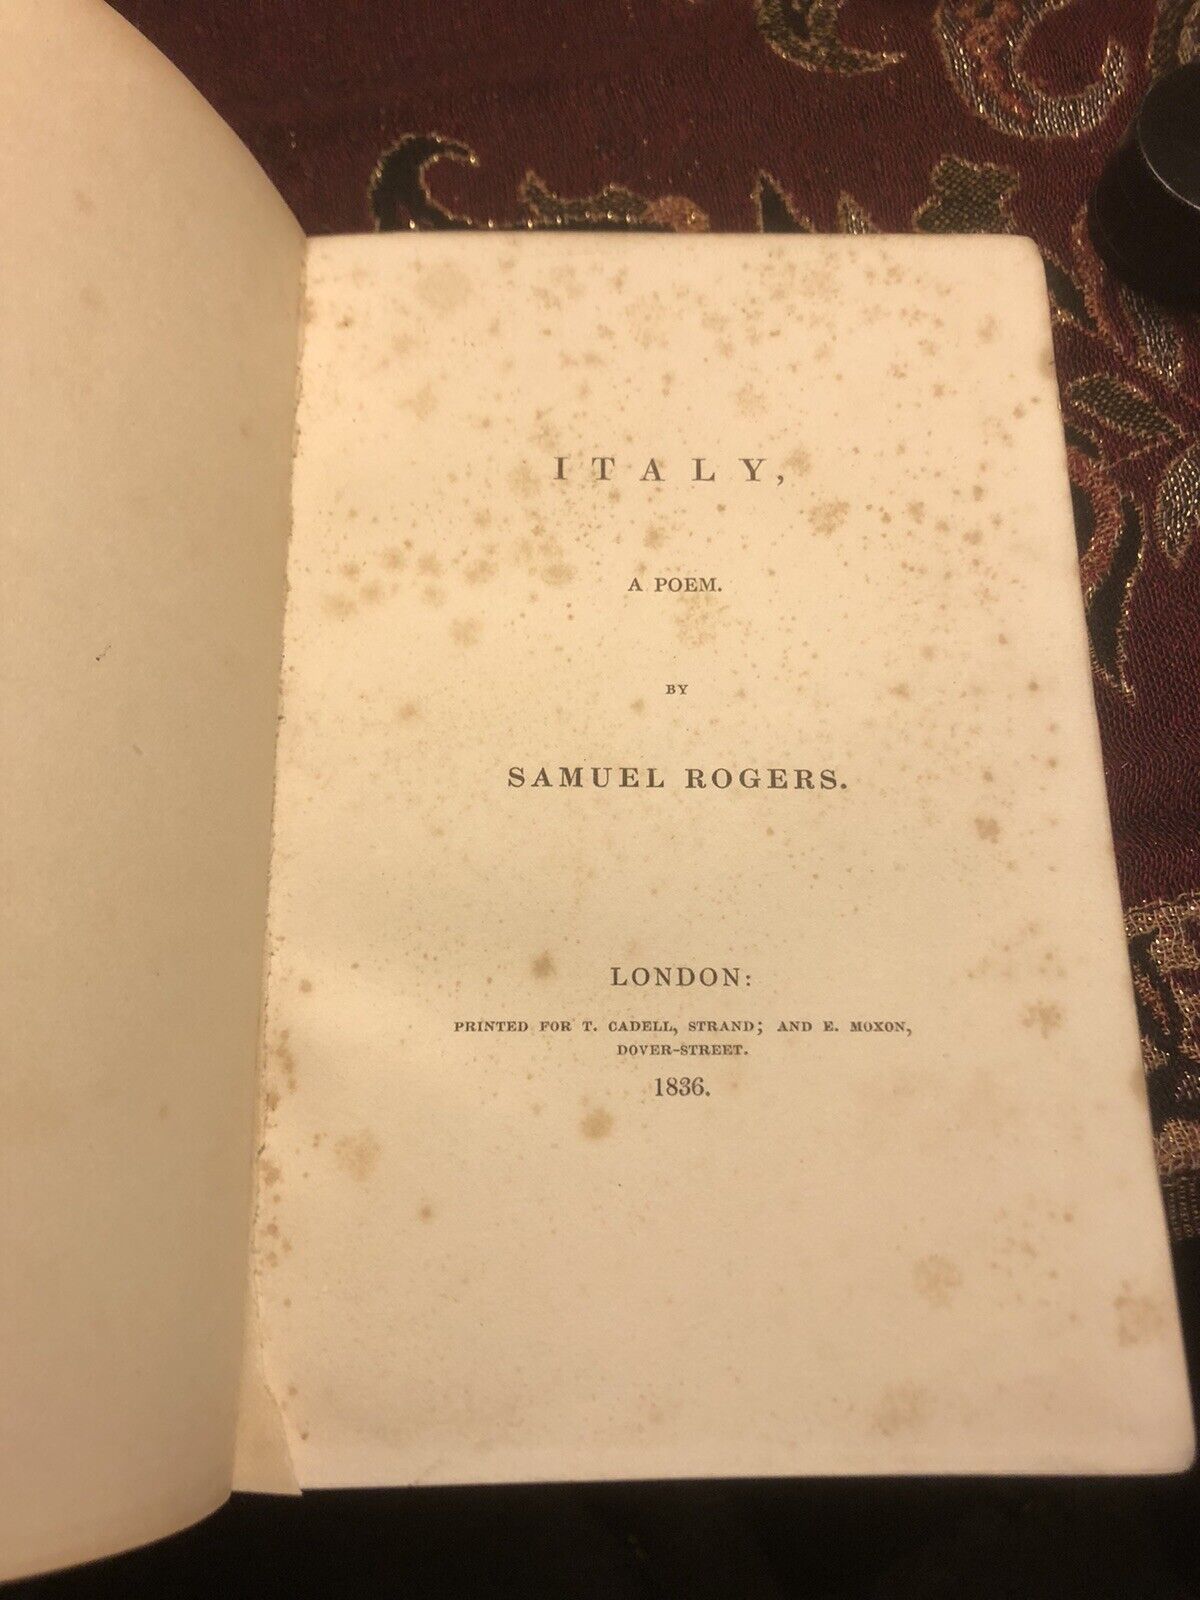 1836 : ITALY : A POEM by SAMUEL ROGERS Full Fine Leather Binding ENGRAVINGS